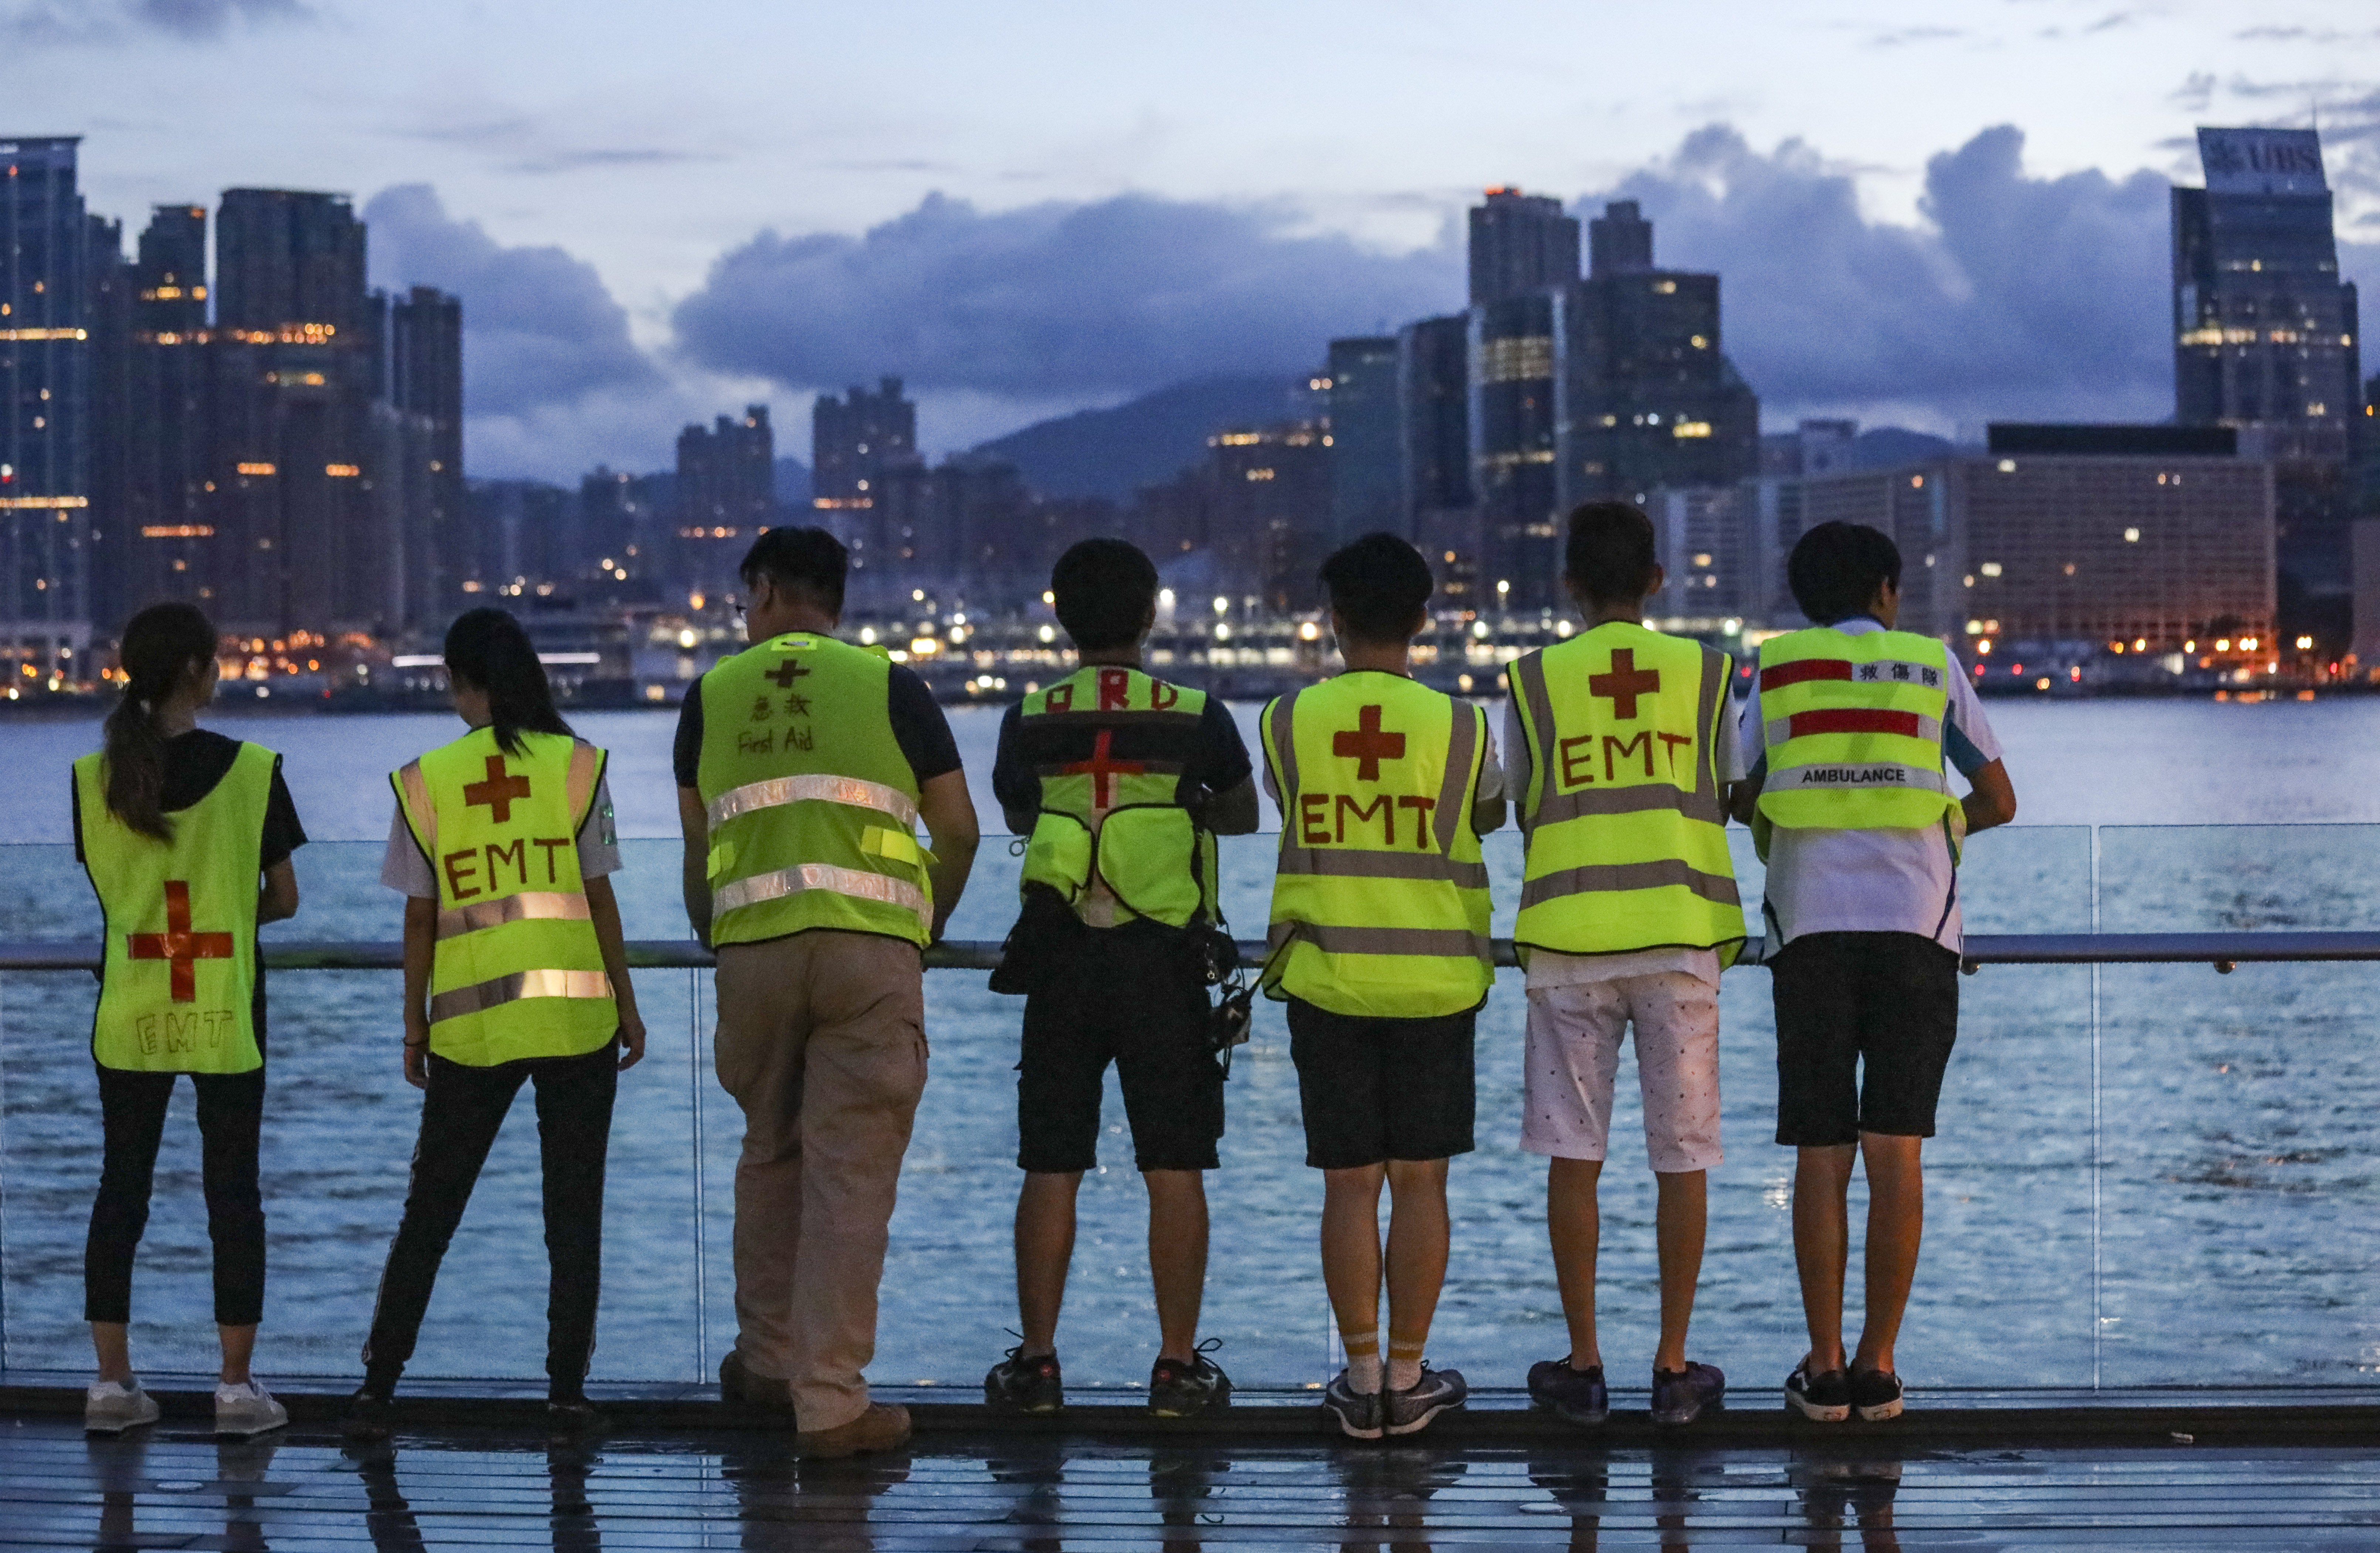 Protesters against the extradition bill take a breather at the harbourfront overlooking the Kowloon skyline outside government headquarters in Tamar, Admiralty, on June 18. The rising cost of housing in Hong Kong has fuelled public dissatisfaction. Photo: Dickson Lee